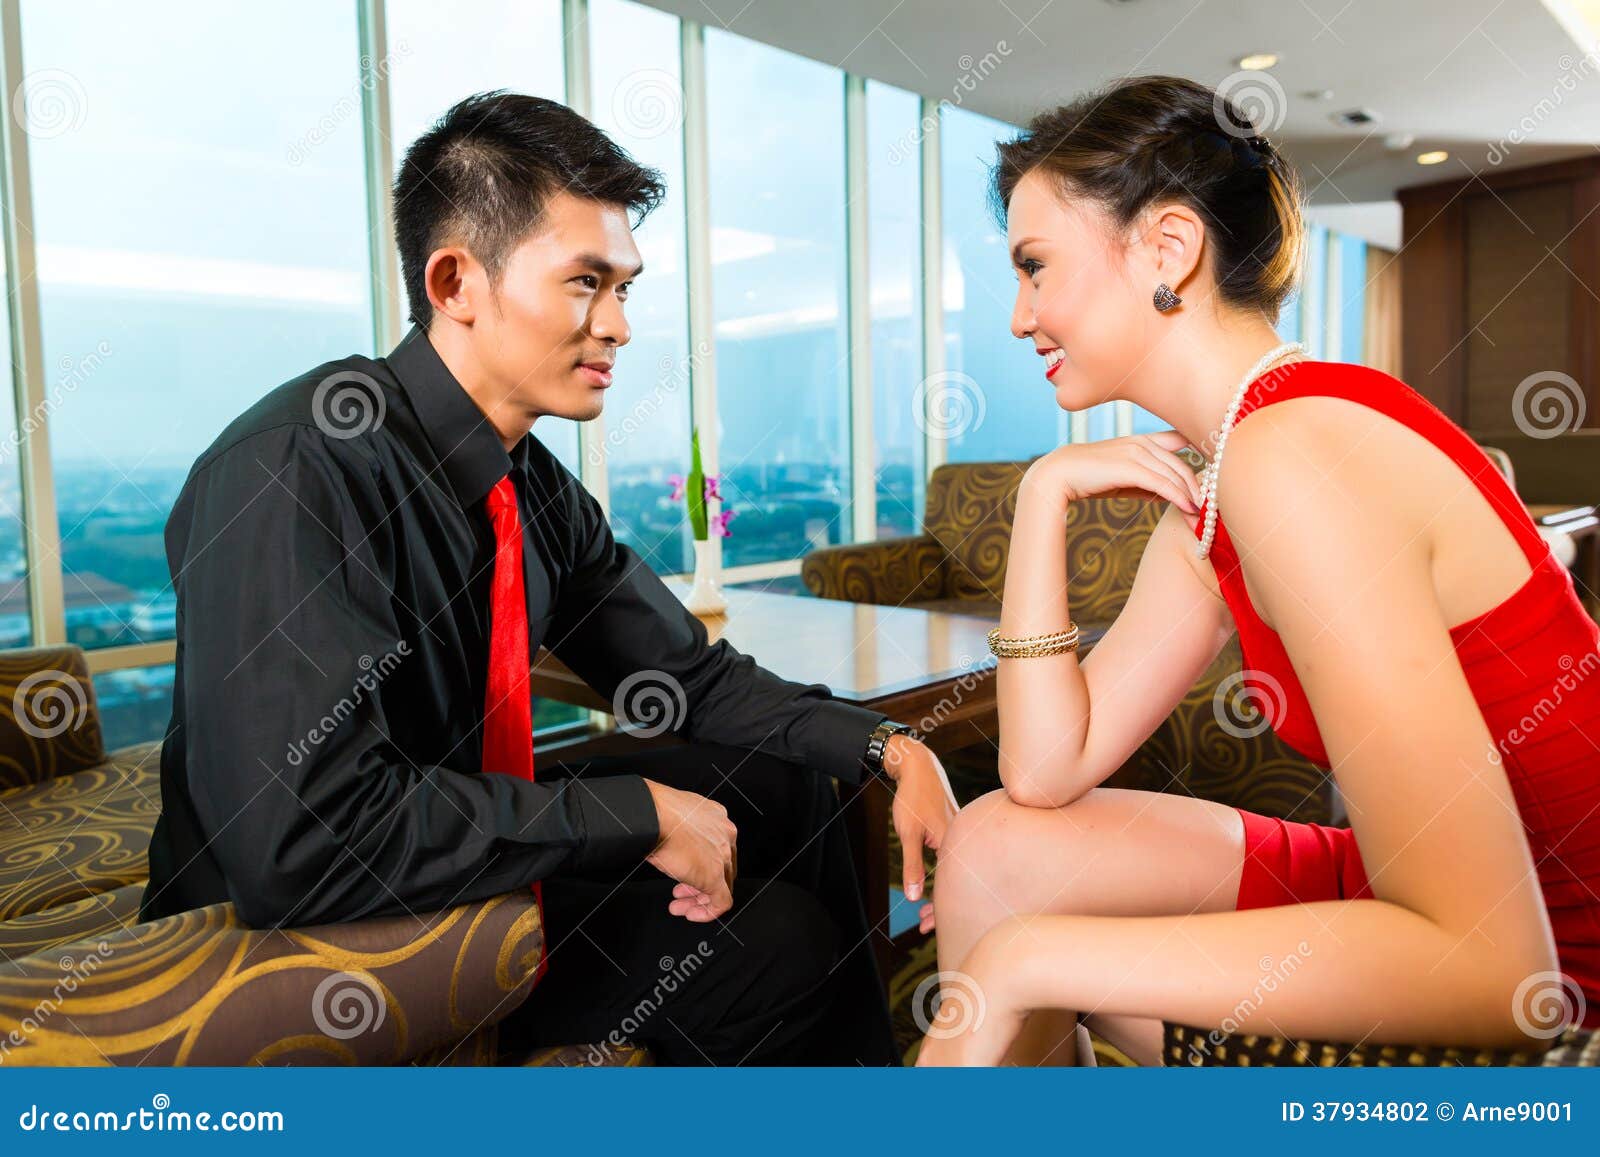 Chinese Couple Flirting in a Luxury Sky Hotel Bar Stock Photo picture